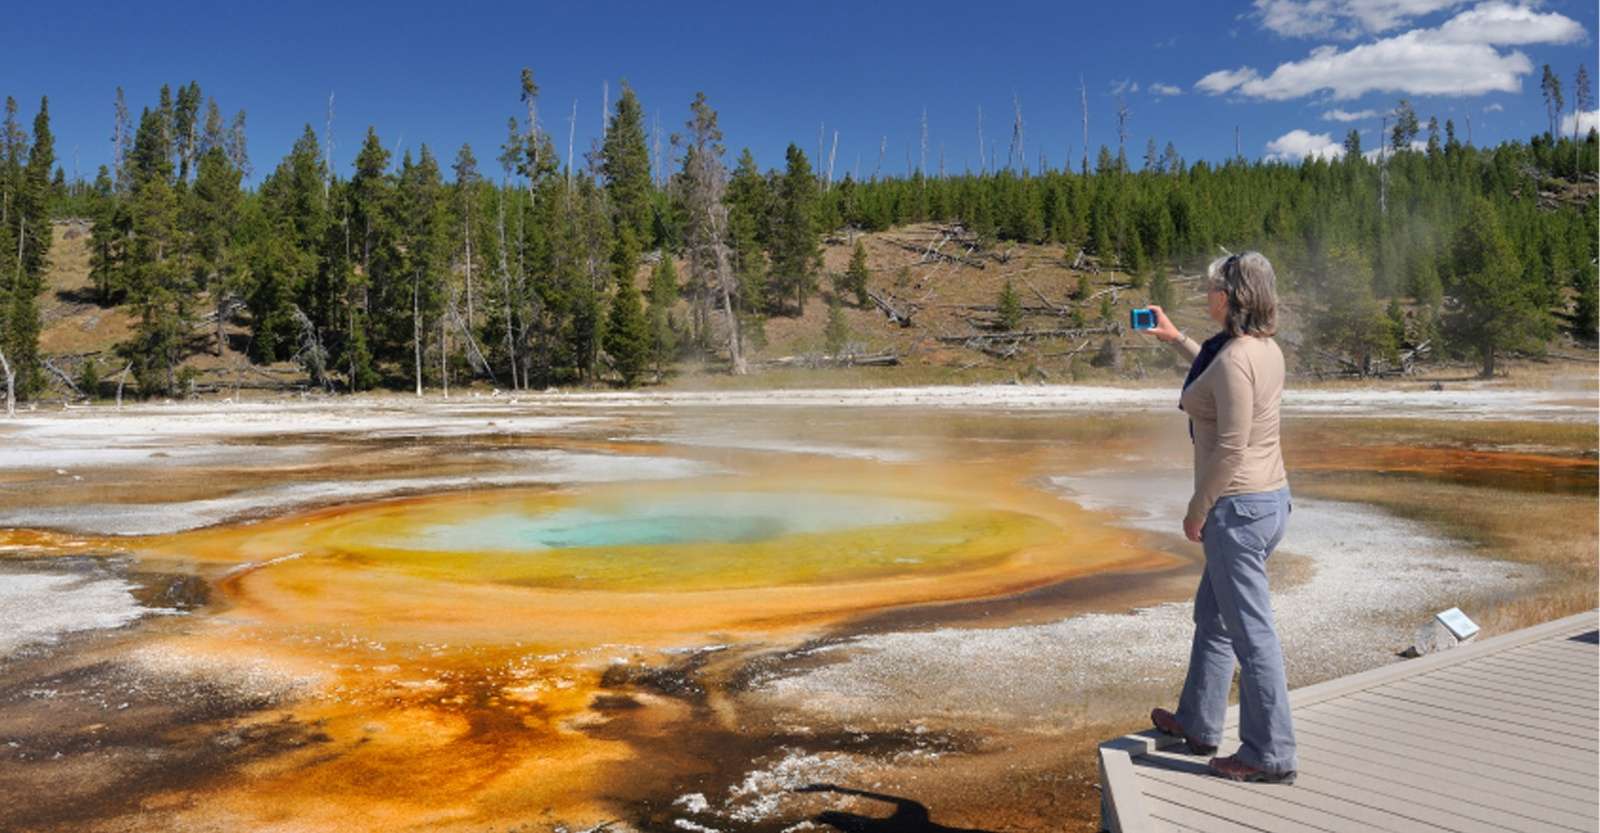 Guest and hot spring, Yellowstone National Park, Wyoming.